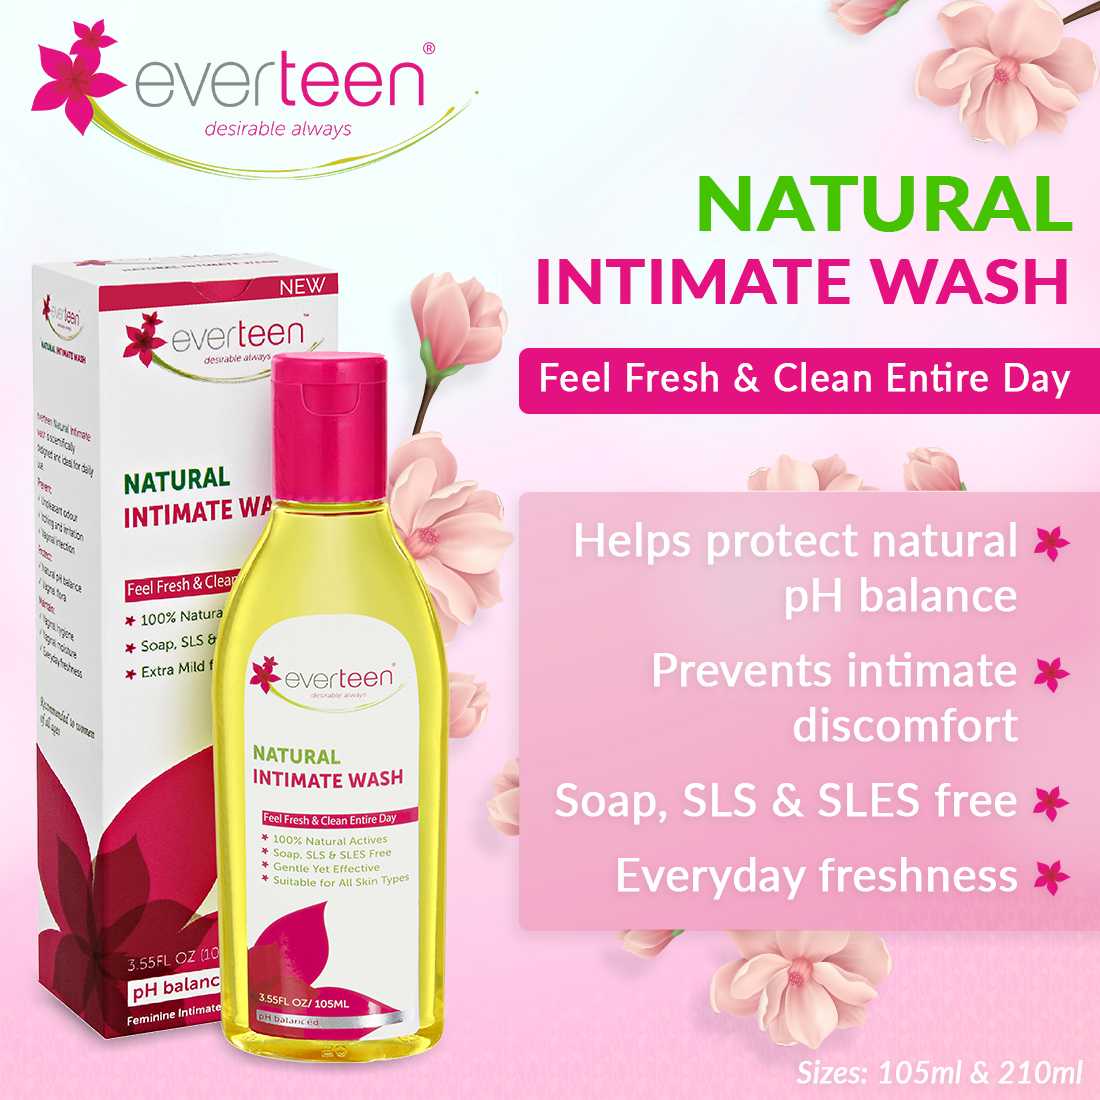 everteen Value Combo - Bikini Line Hair Remover Creme RADIANCE and Natural Intimate Wash 105ml for Women - everteen